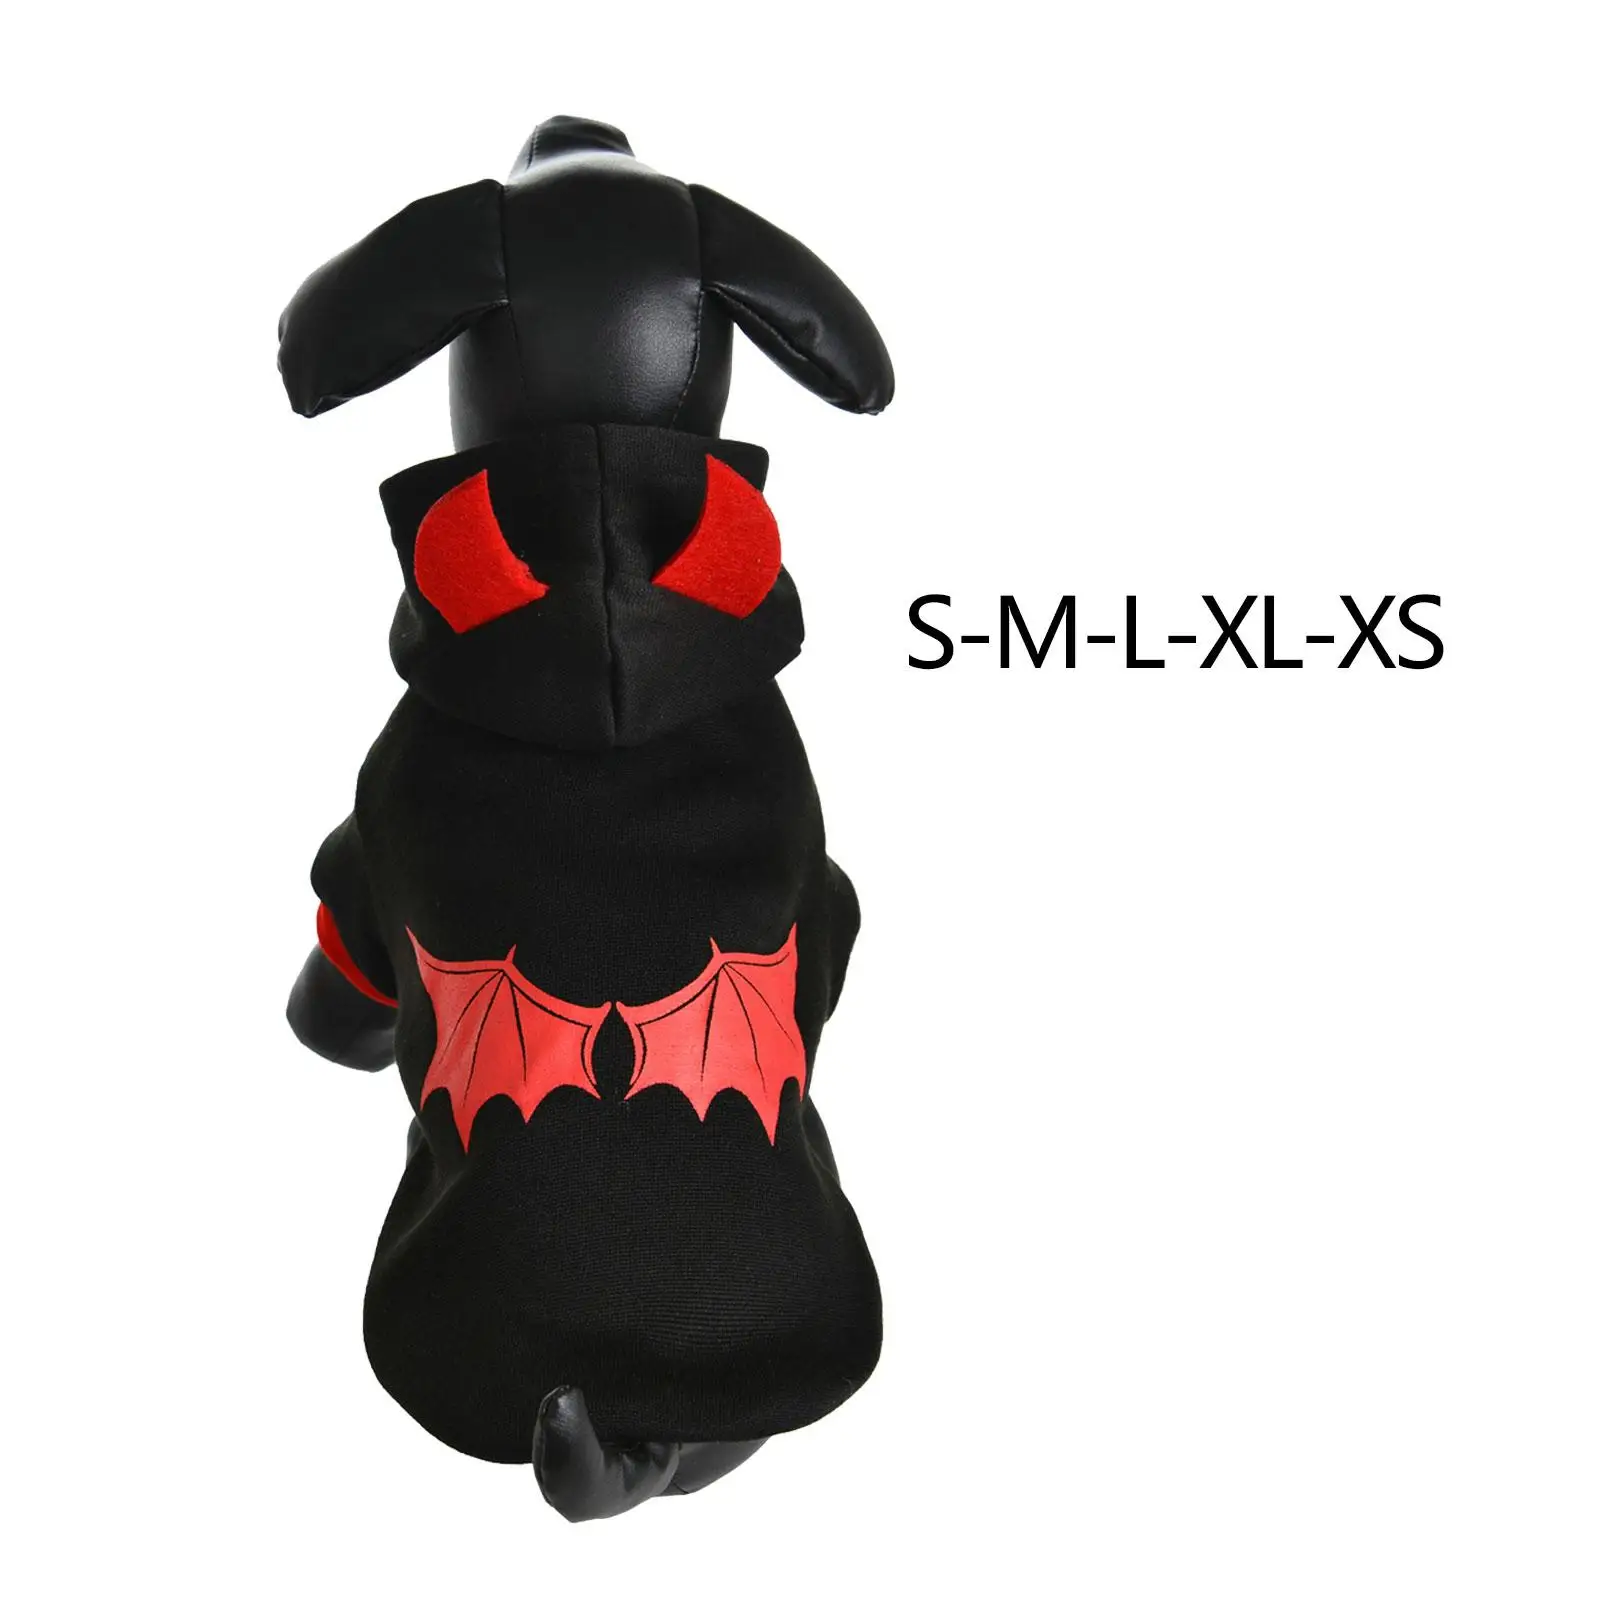 Dog Sweatshirt Hoodie Funny Devil Printing Dress up Dog Winter Warm Hoodie for Medium Large Dogs Party Cosplay Decoration